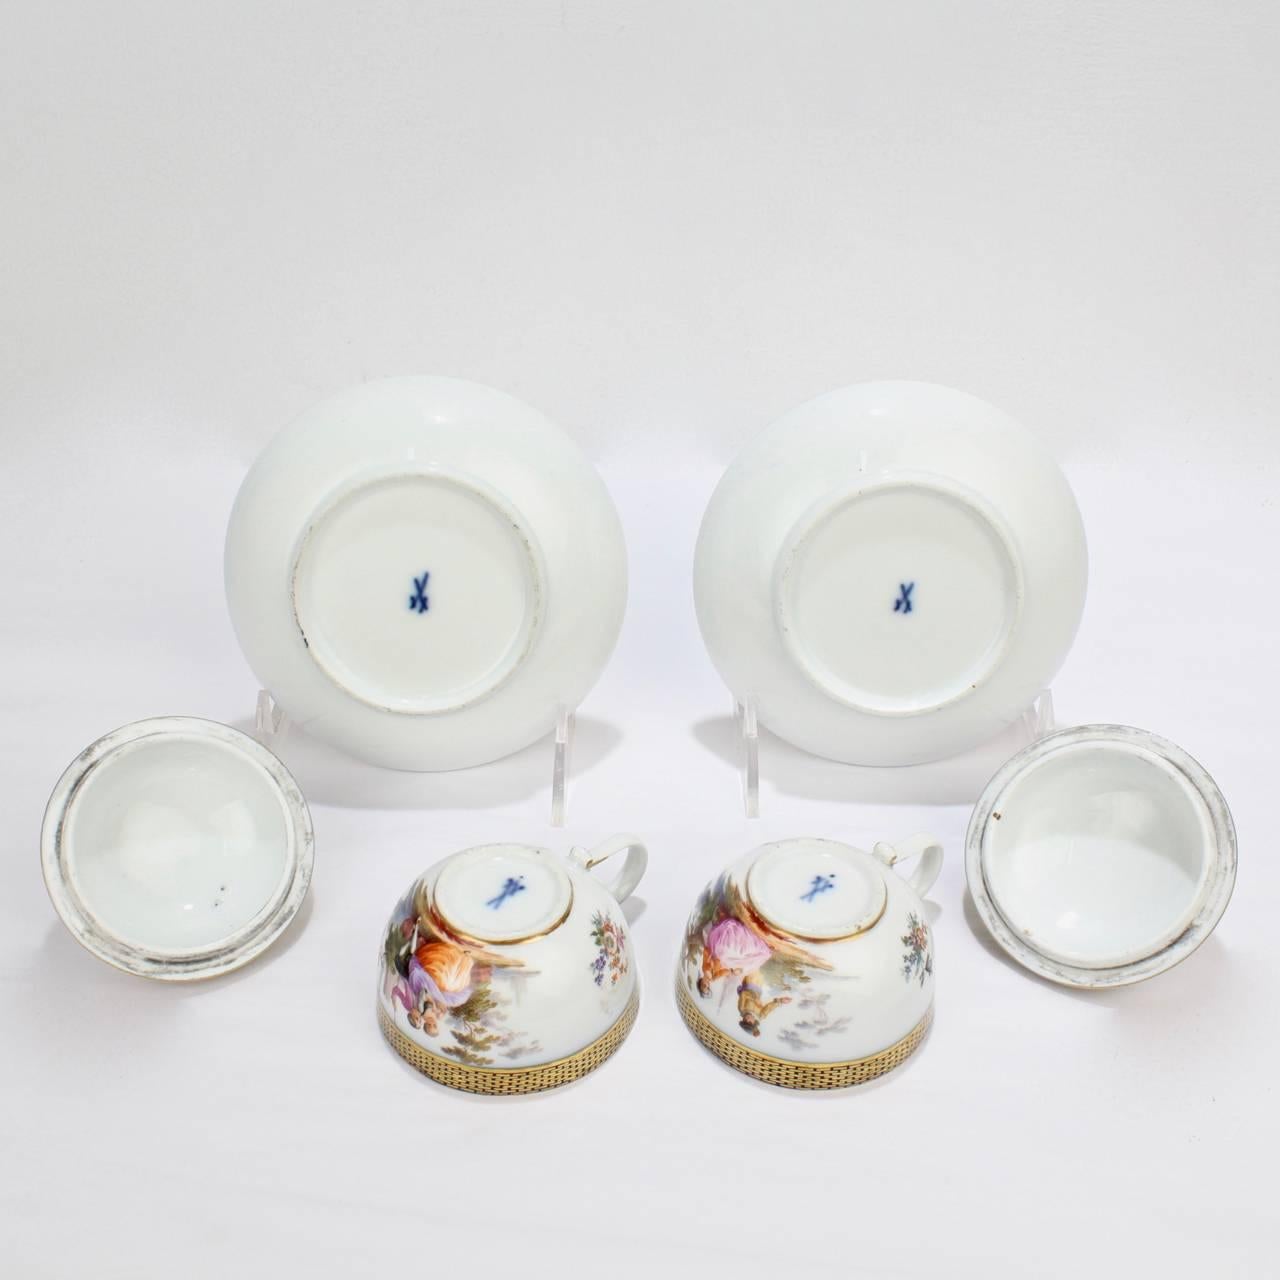 Pair of Antique Meissen Porcelain Covered Tea Cups and Saucers, 19th Century 3